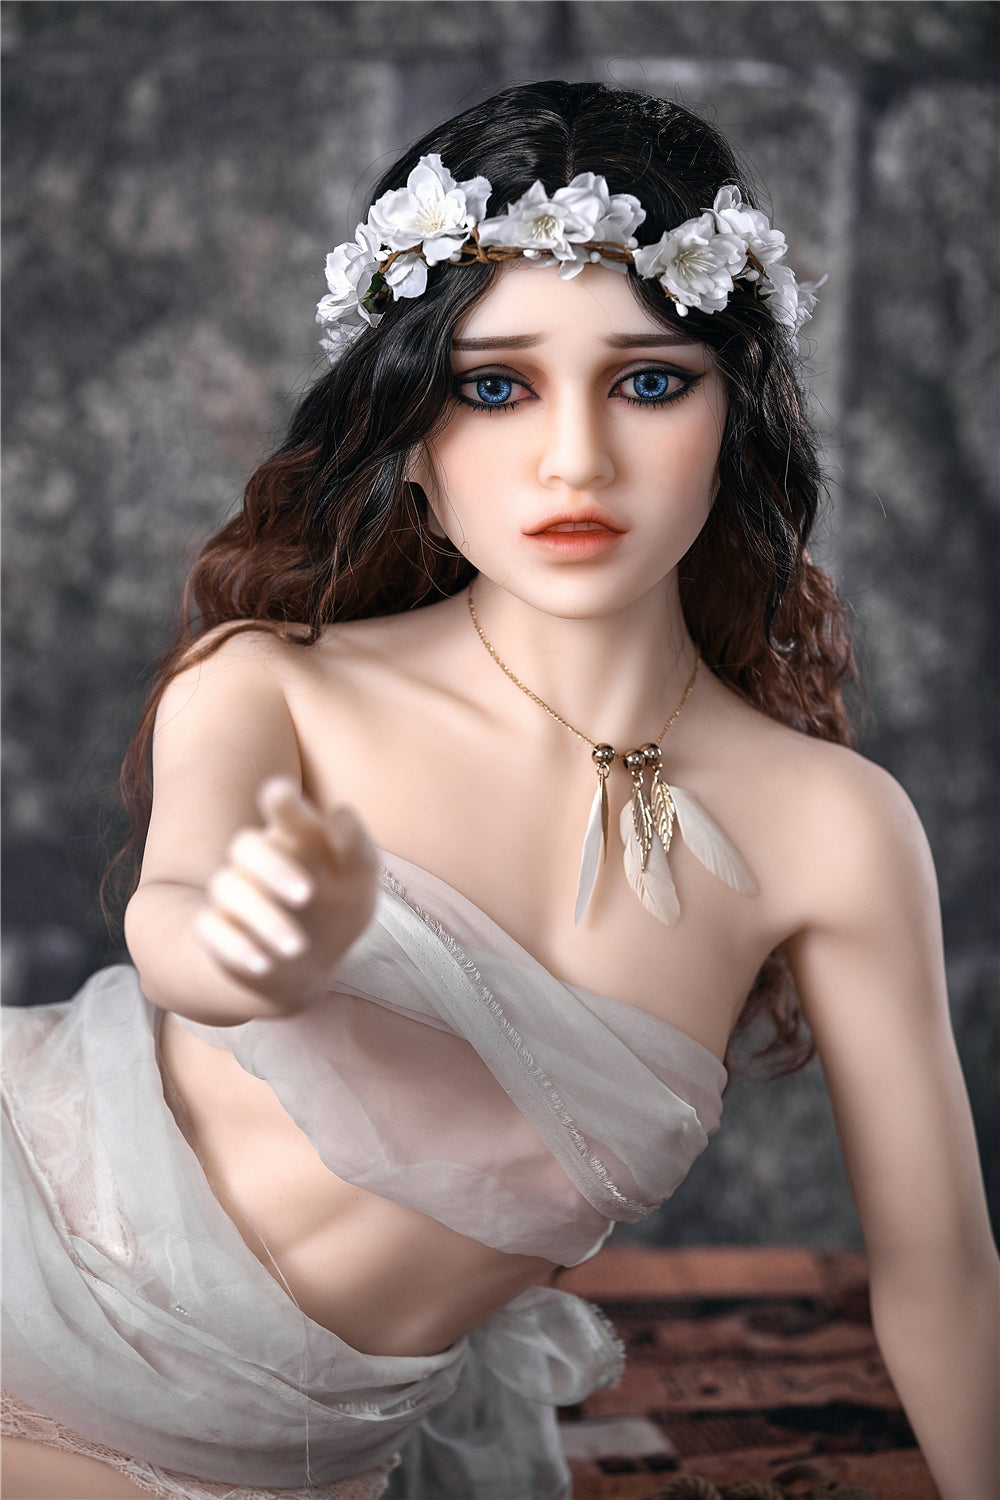 Irontech Doll 150 cm B TPE - Diana (USA) | Buy Sex Dolls at DOLLS ACTUALLY